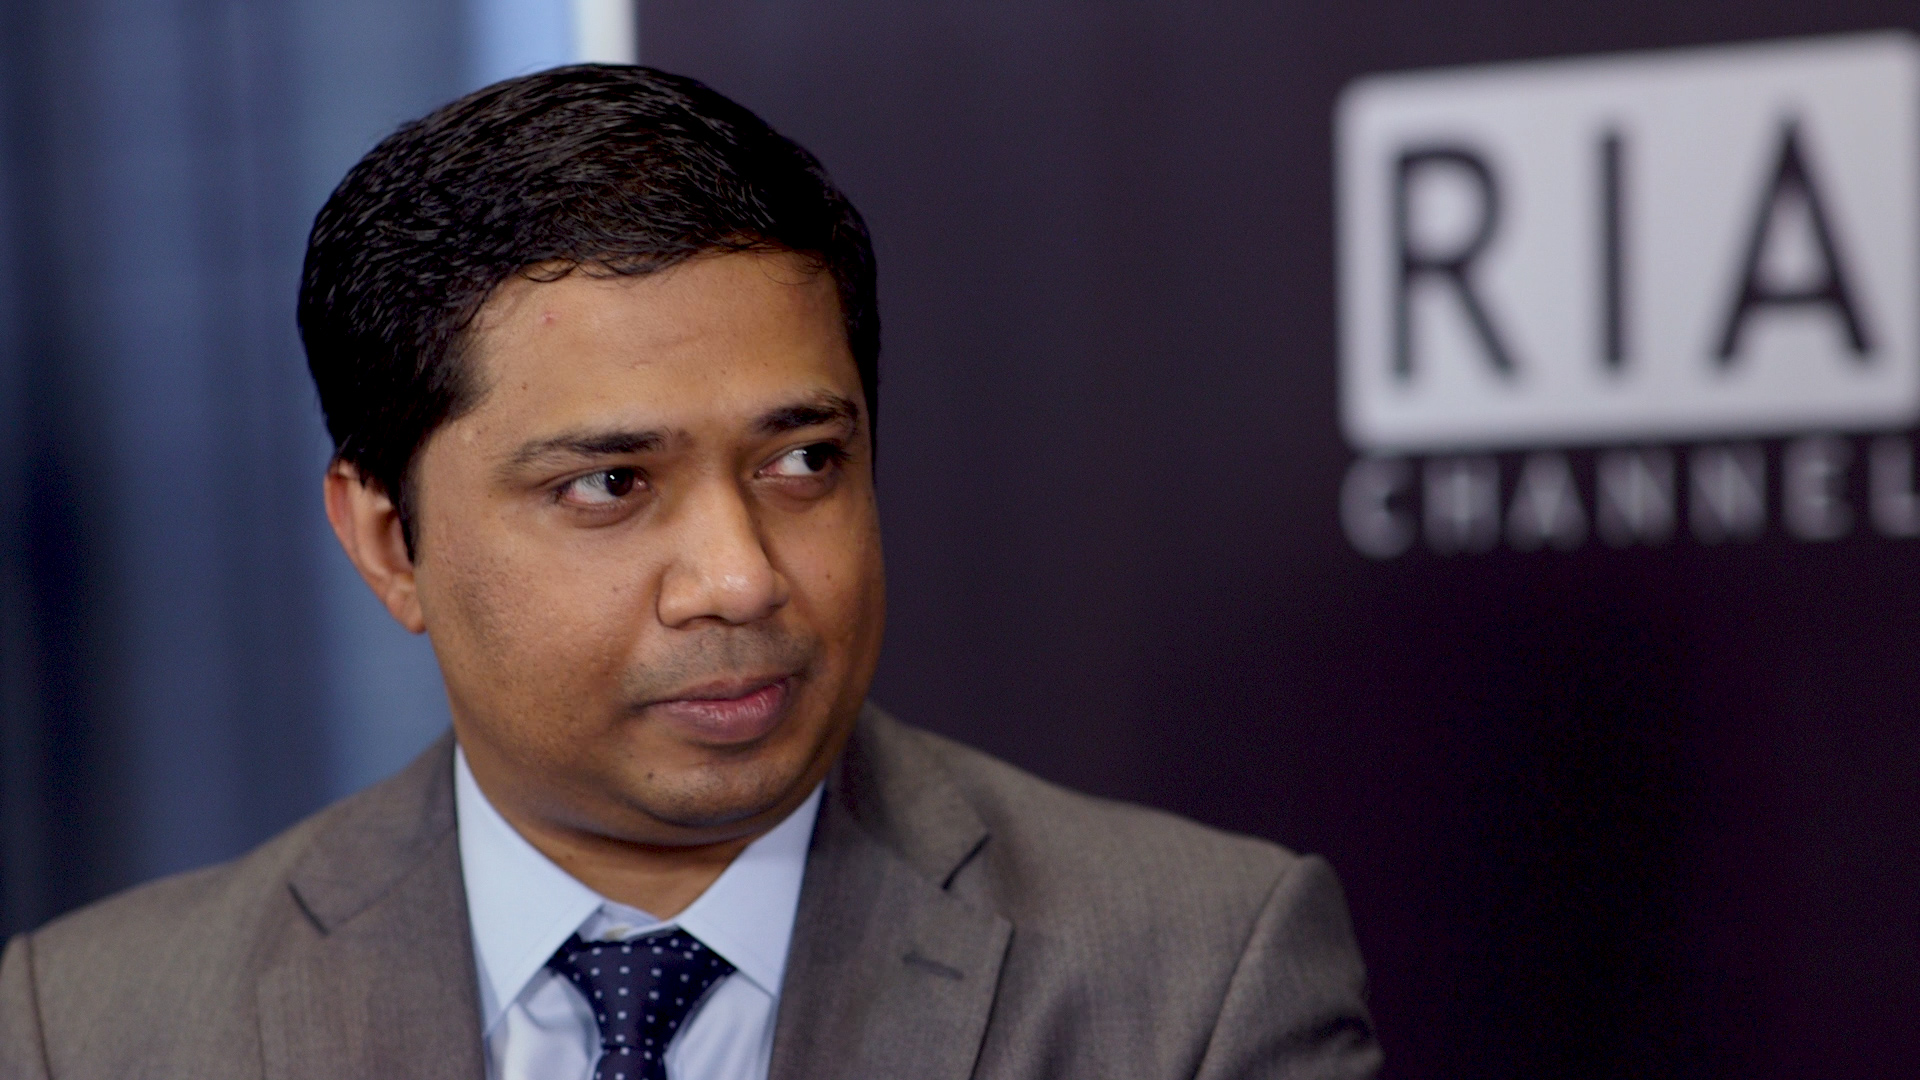 Rajan, Barclays video interview on RIA Channel